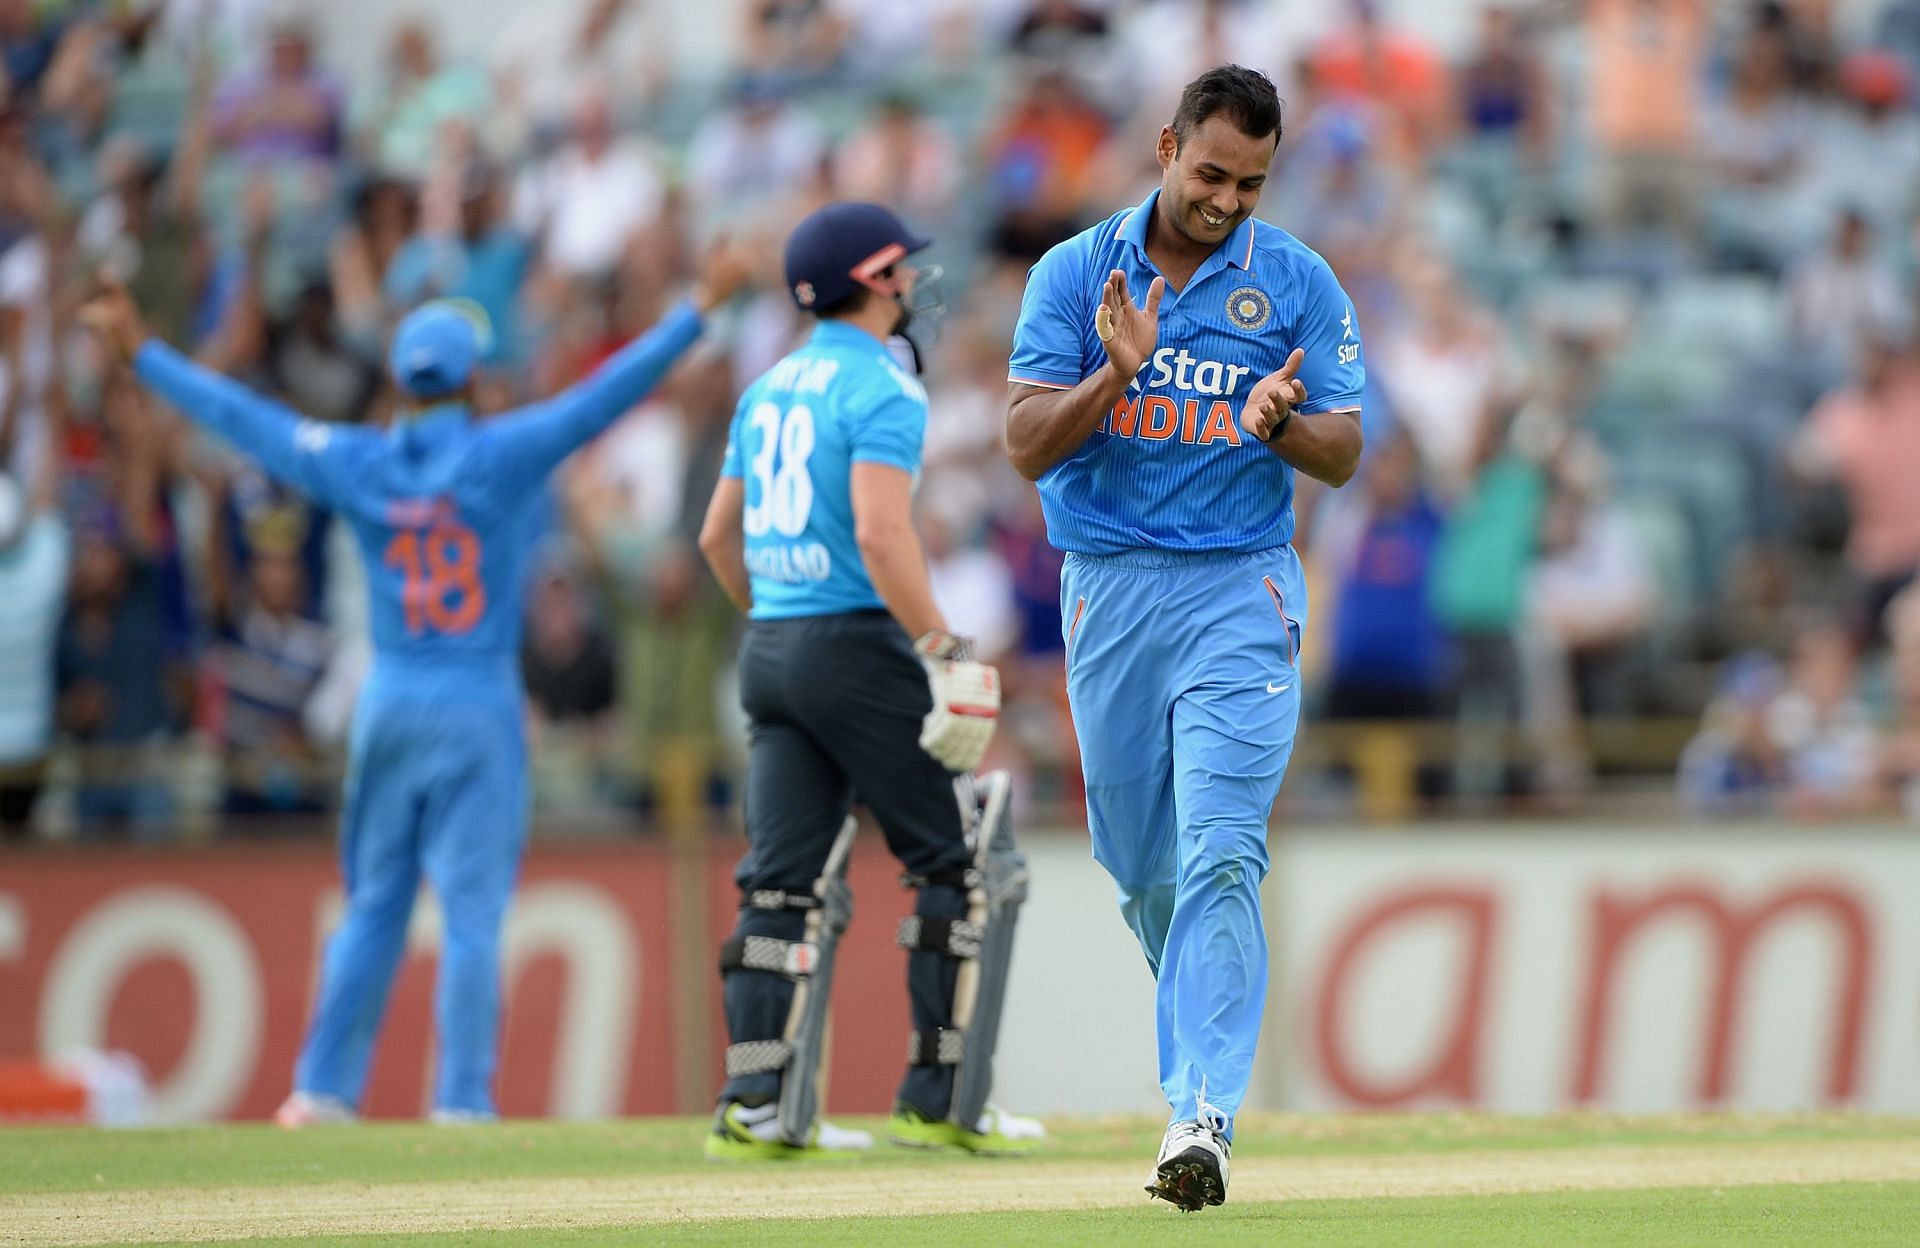 Stuart Binny celebrates a dismissal in a match against England. Pic: Getty Images